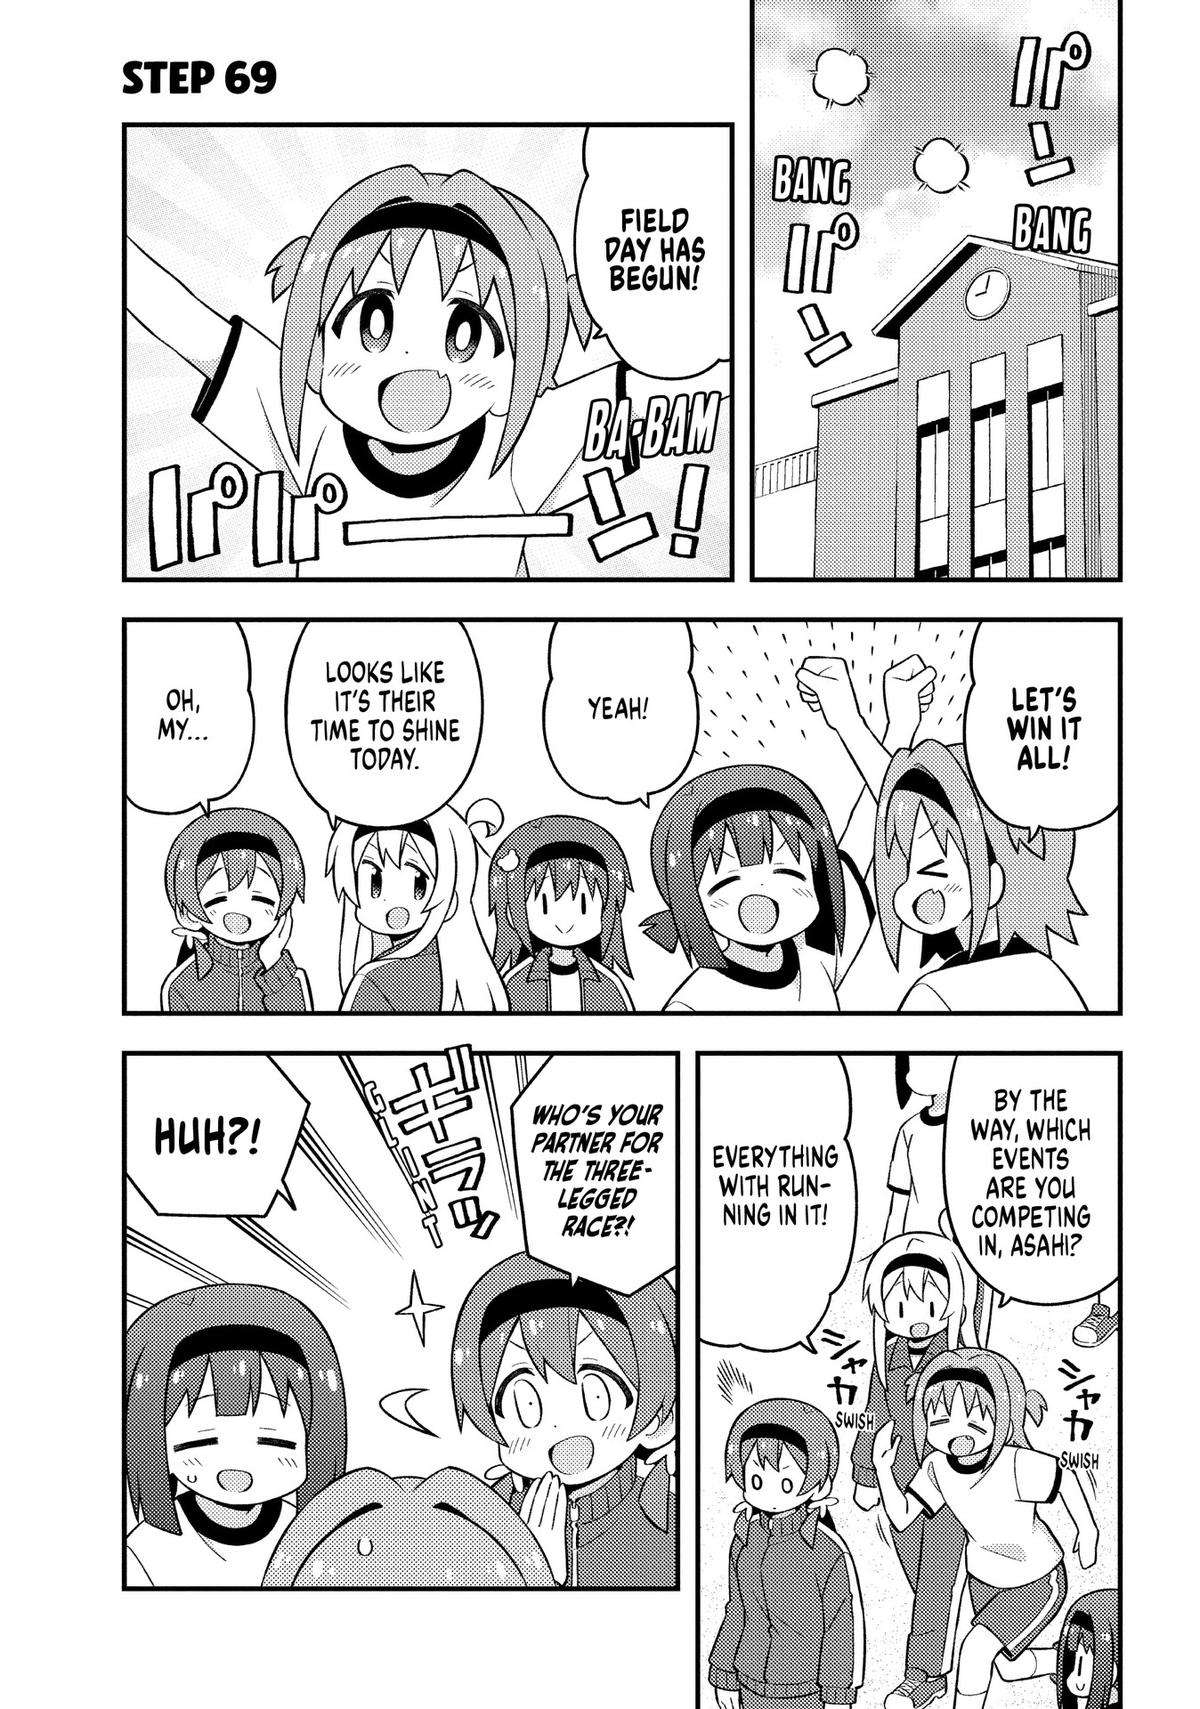 ONIMAI - I'm Now Your Sister! - chapter 69 - #1